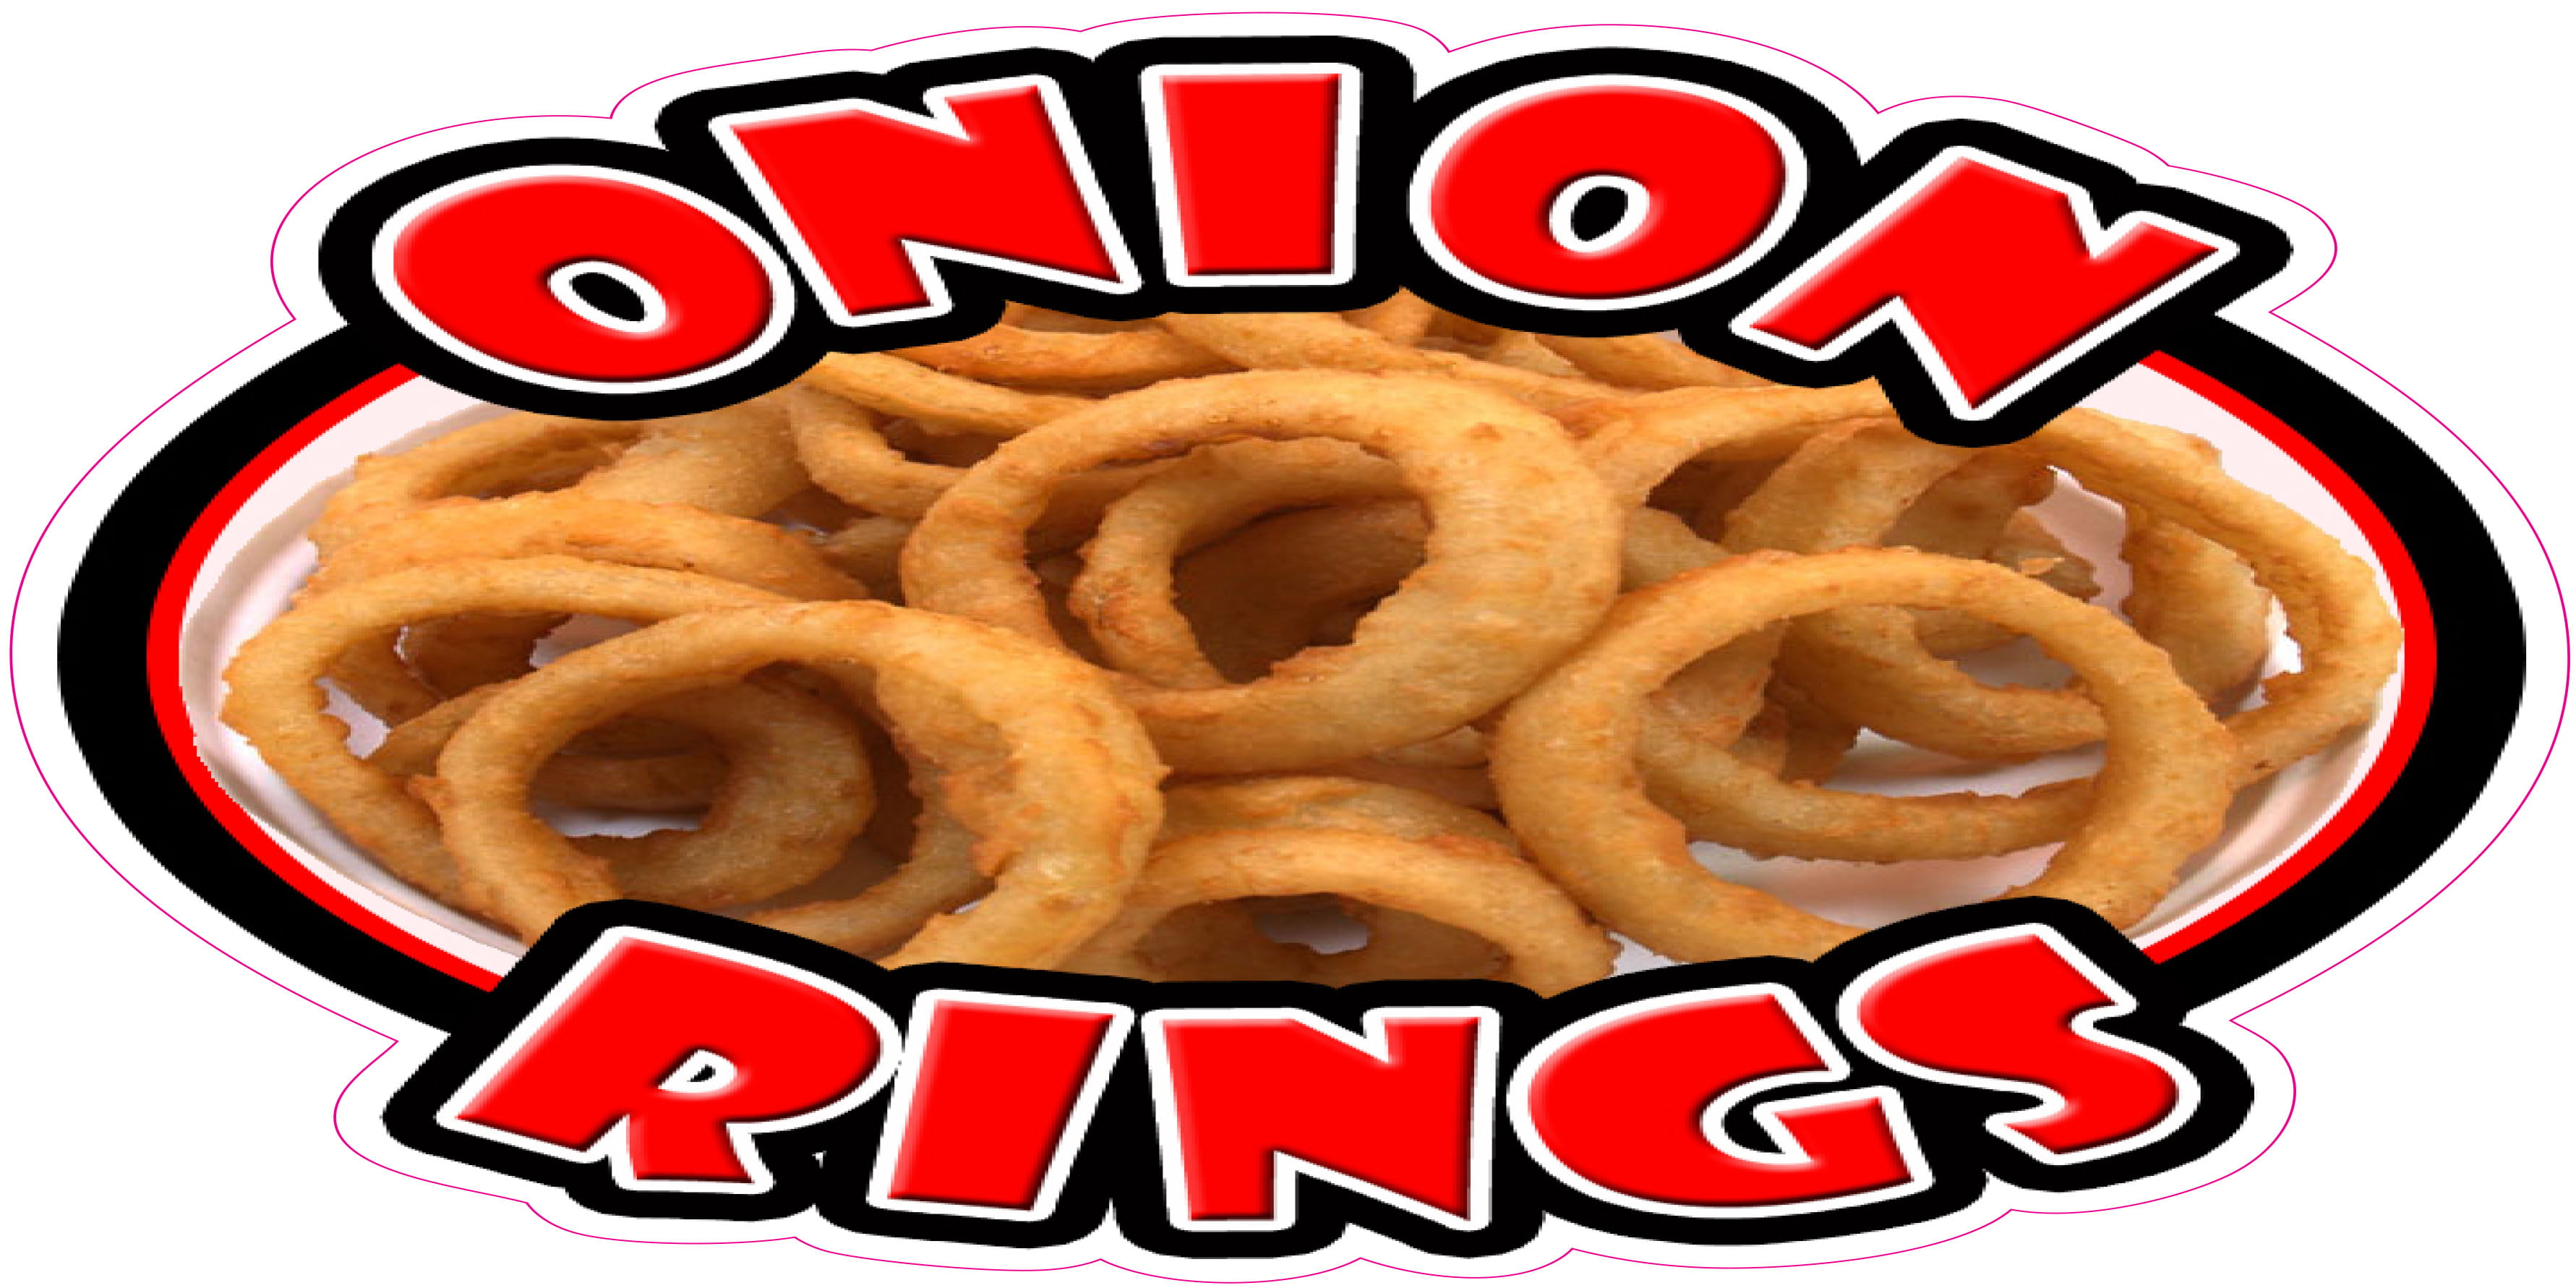 CHOOSE YOUR SIZE Onion Rings DECAL Food Truck Concession Vinyl Sticker 